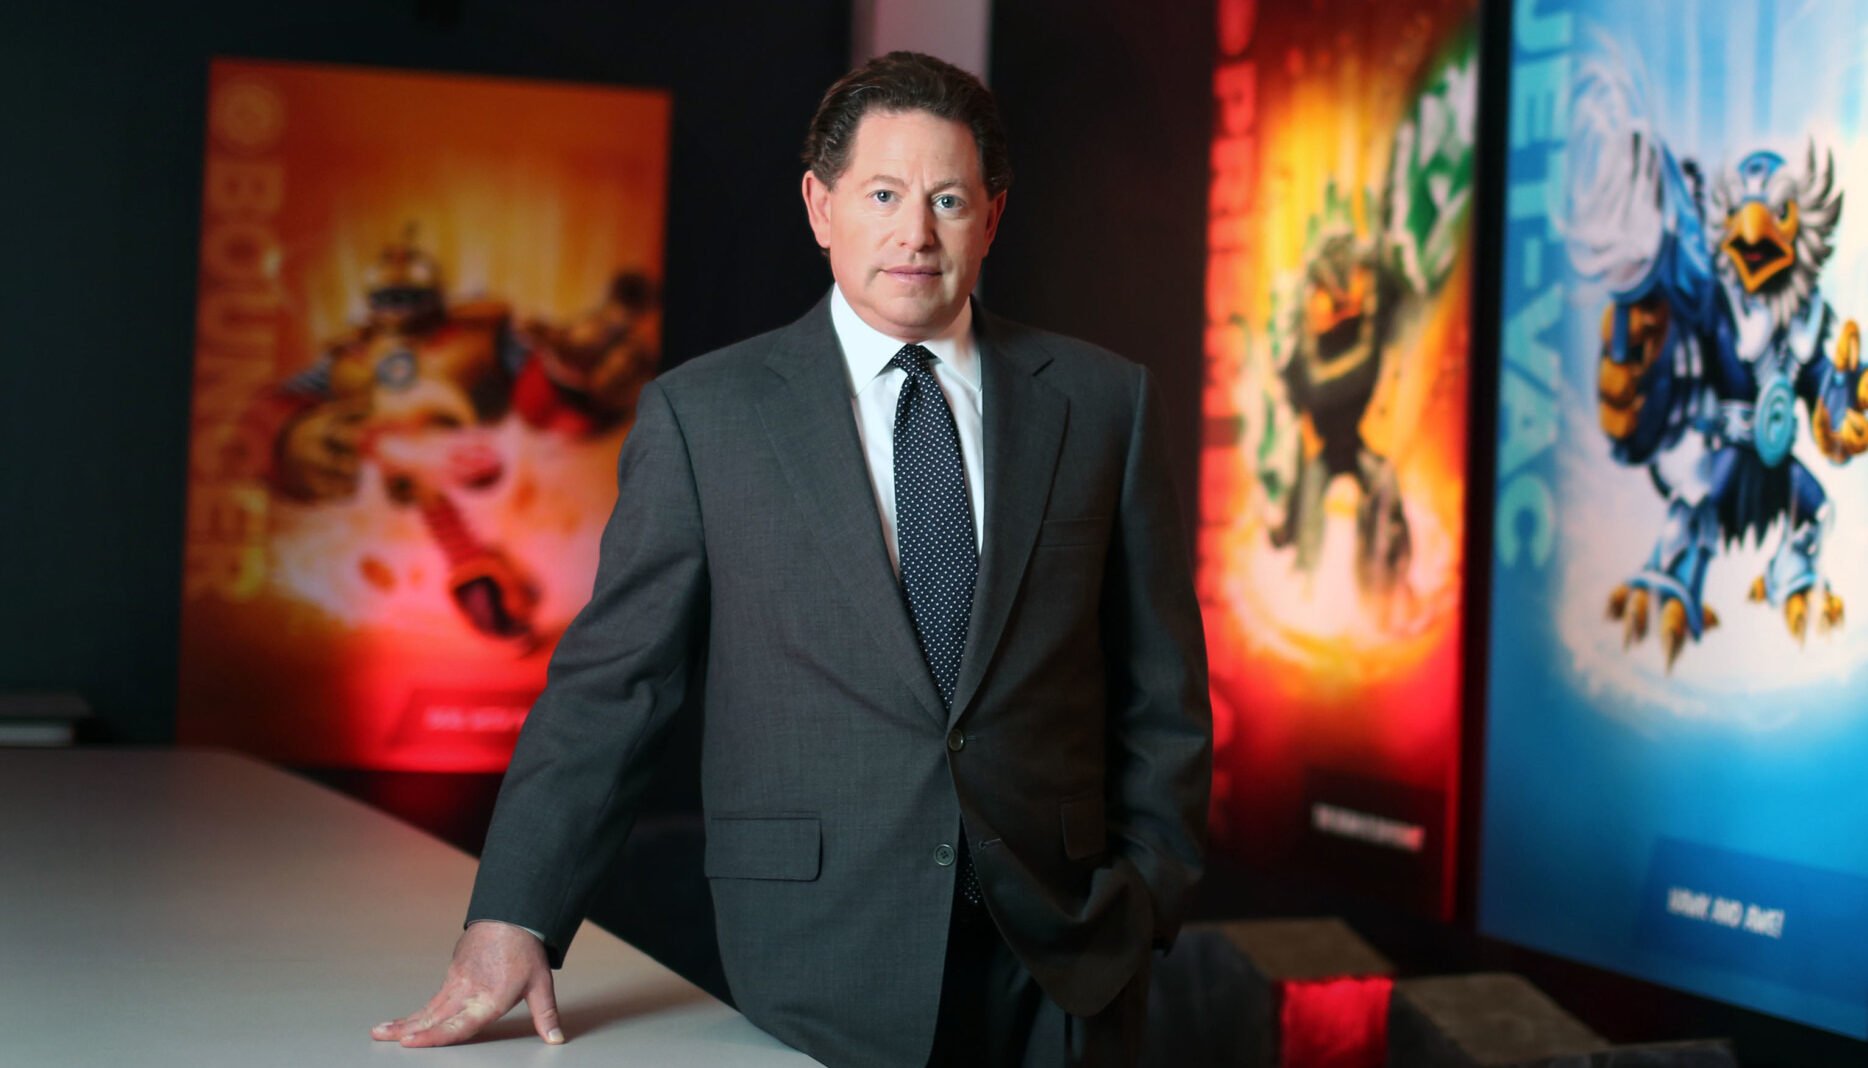 Activision Blizzard's (ATVI) Board is Full of CEO Bobby Kotick's Friends -  Bloomberg